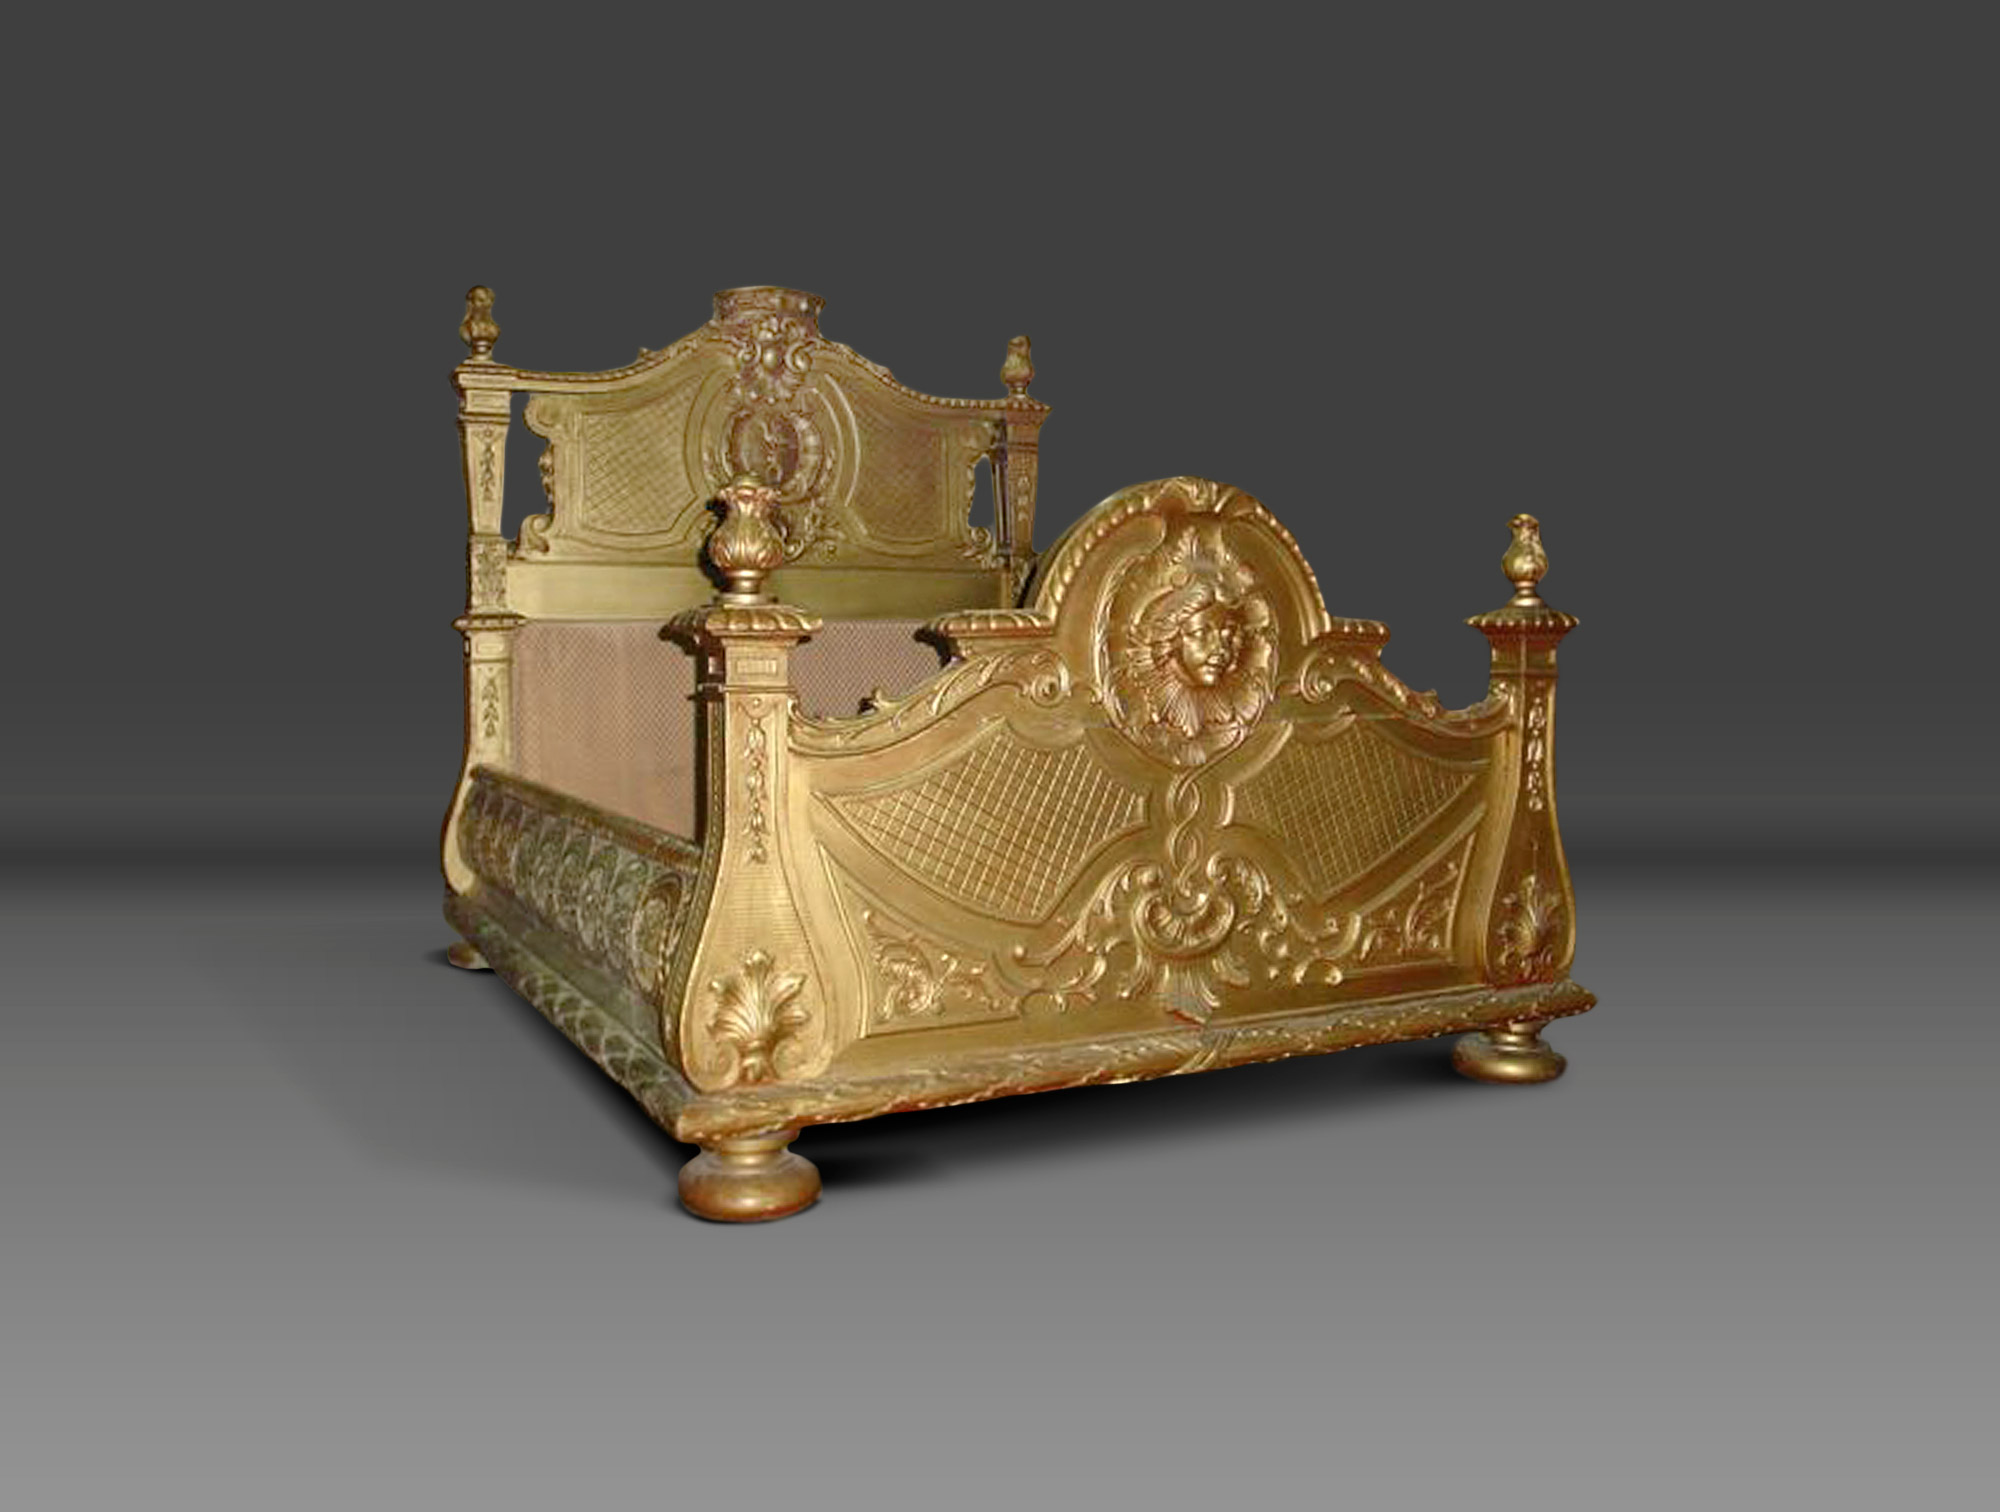 Louis XIV style double bed Soubrier - Rent Furniture Bed XVIIth